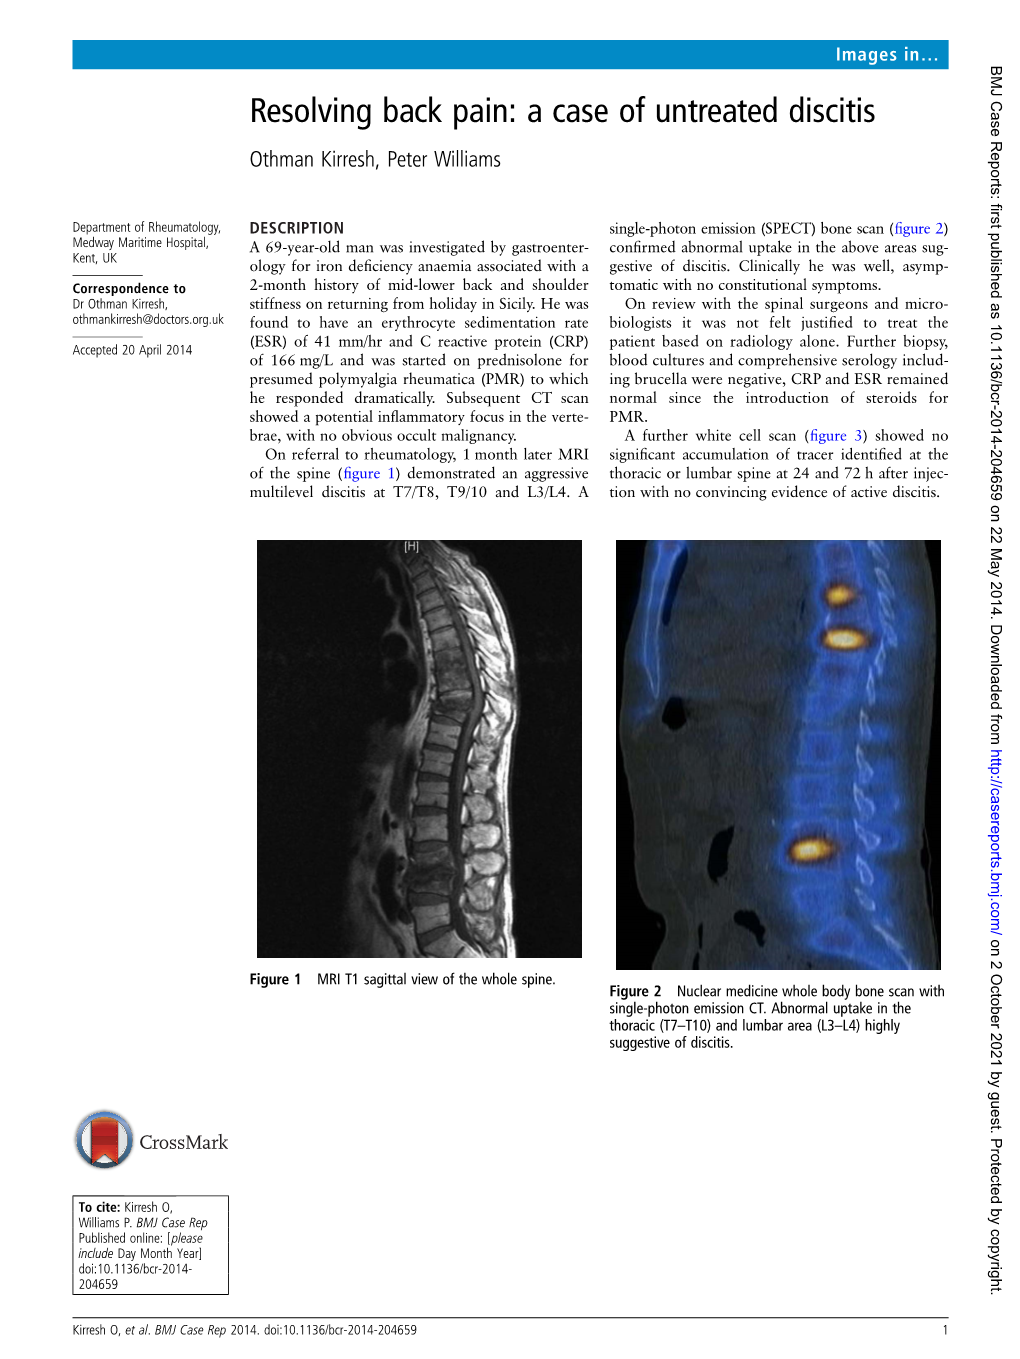 Resolving Back Pain: a Case of Untreated Discitis Othman Kirresh, Peter Williams